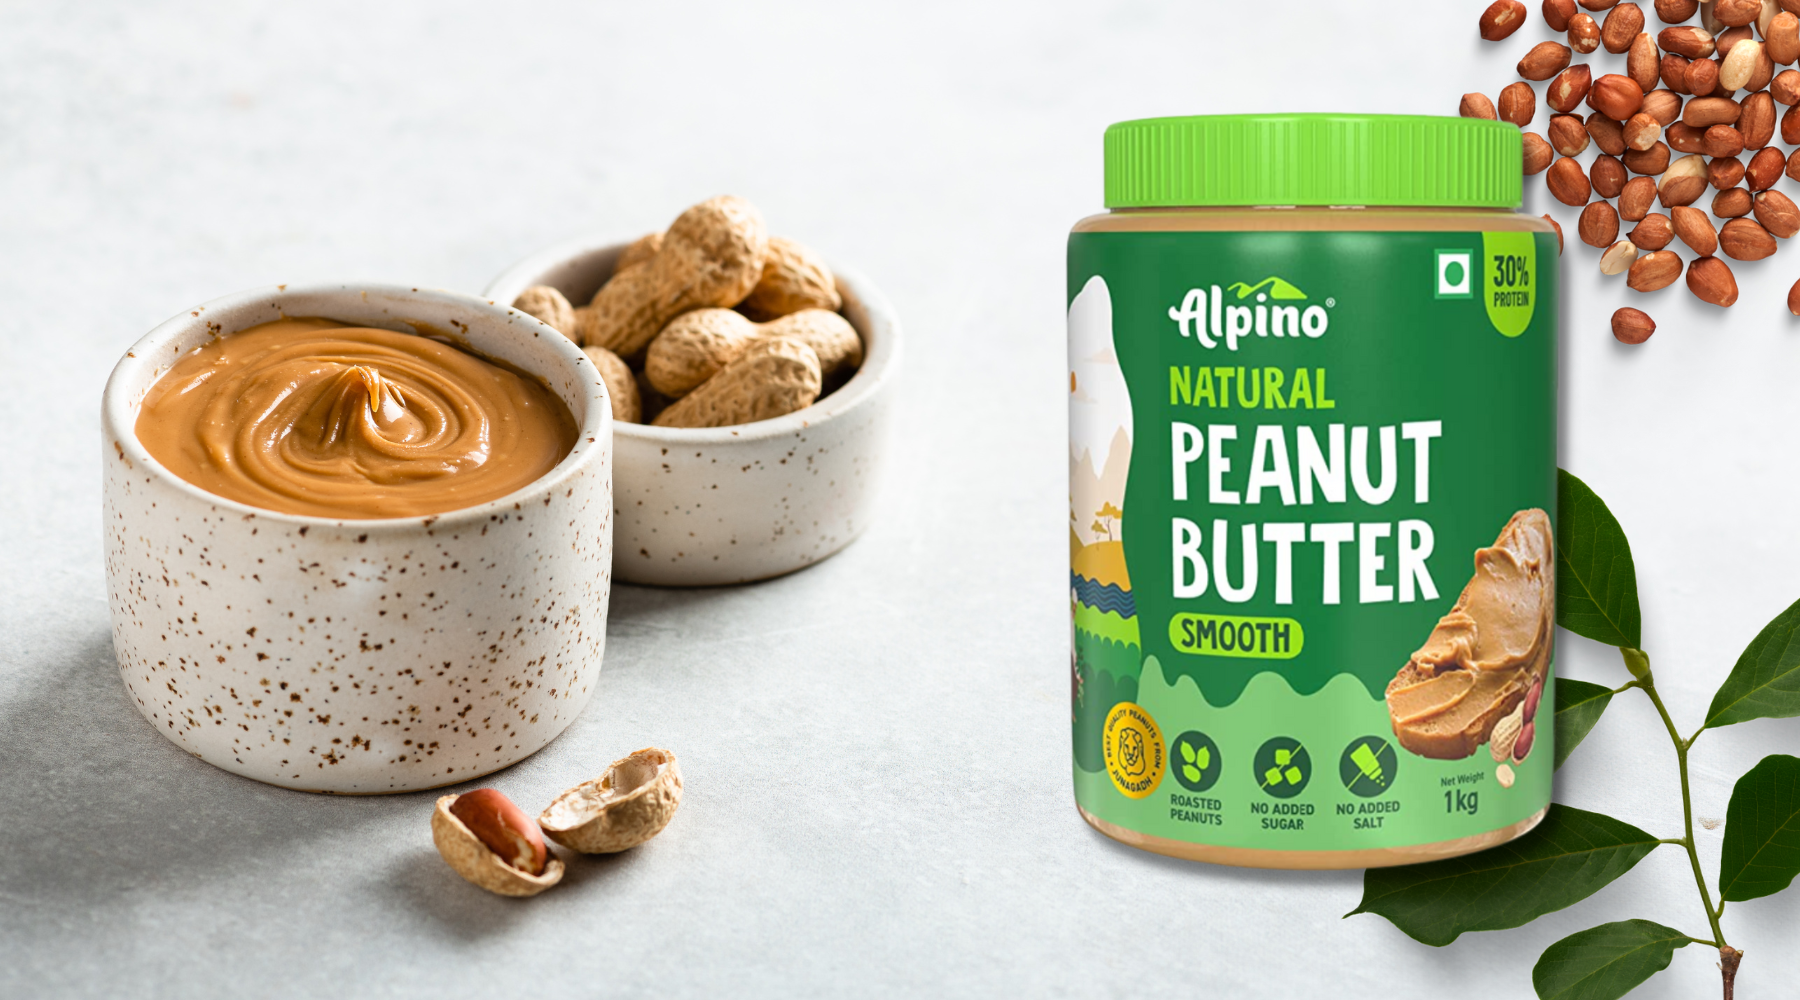 Alpino Peanut Butter: A Review of Taste, Texture and Quality